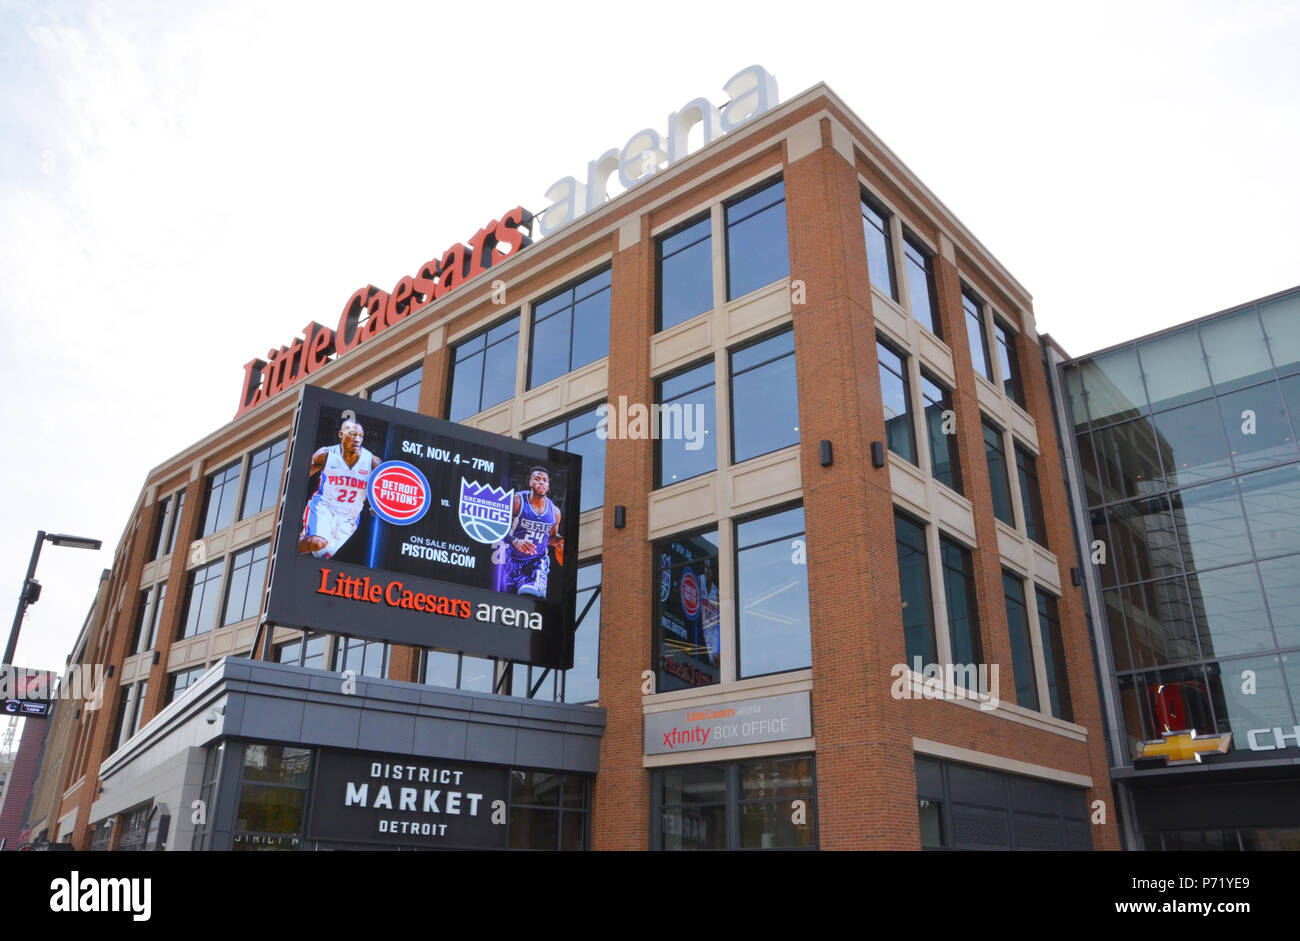 Little Caesars Arena, section 218, home of Detroit Pistons